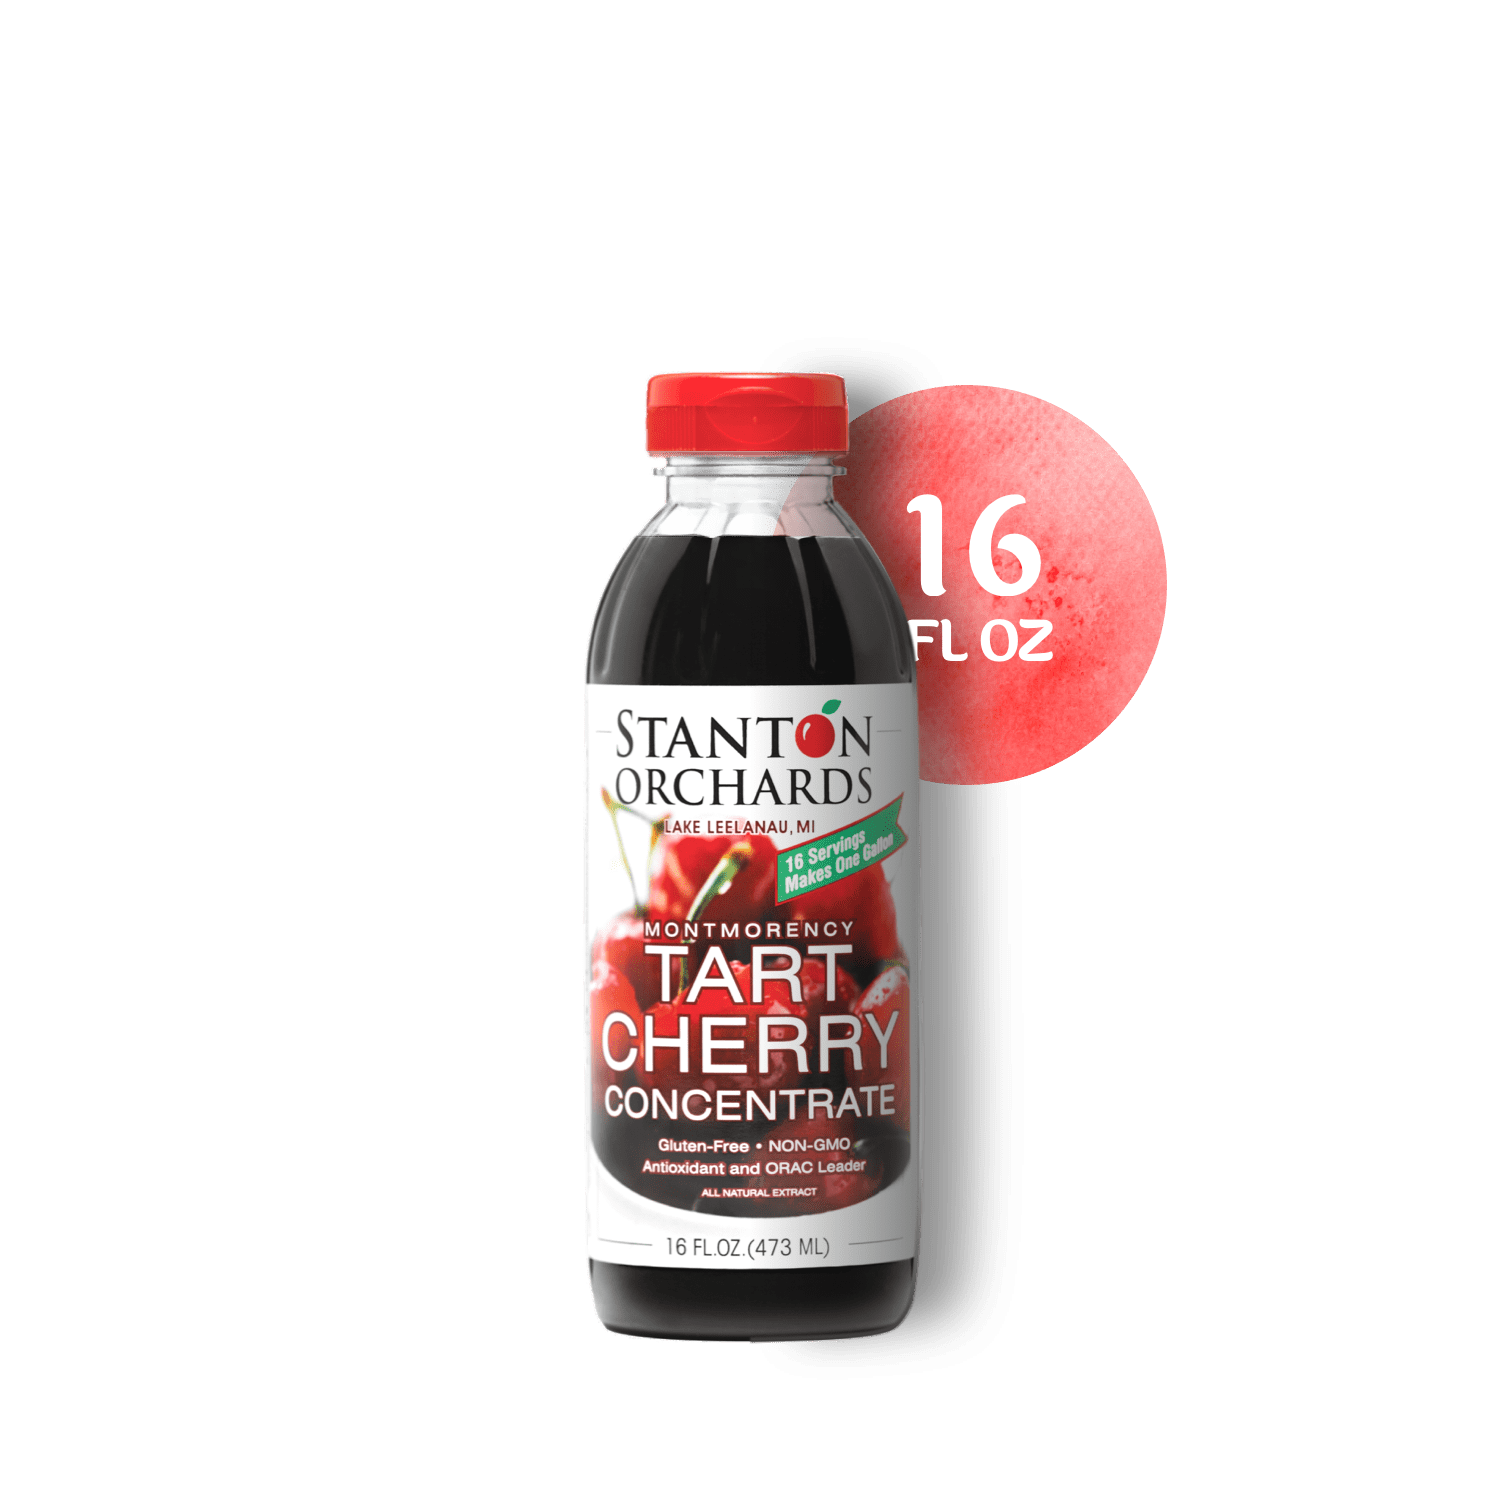 Single 16 oz bottle of Stanton Orchards Montmorency tart cherry concentrate